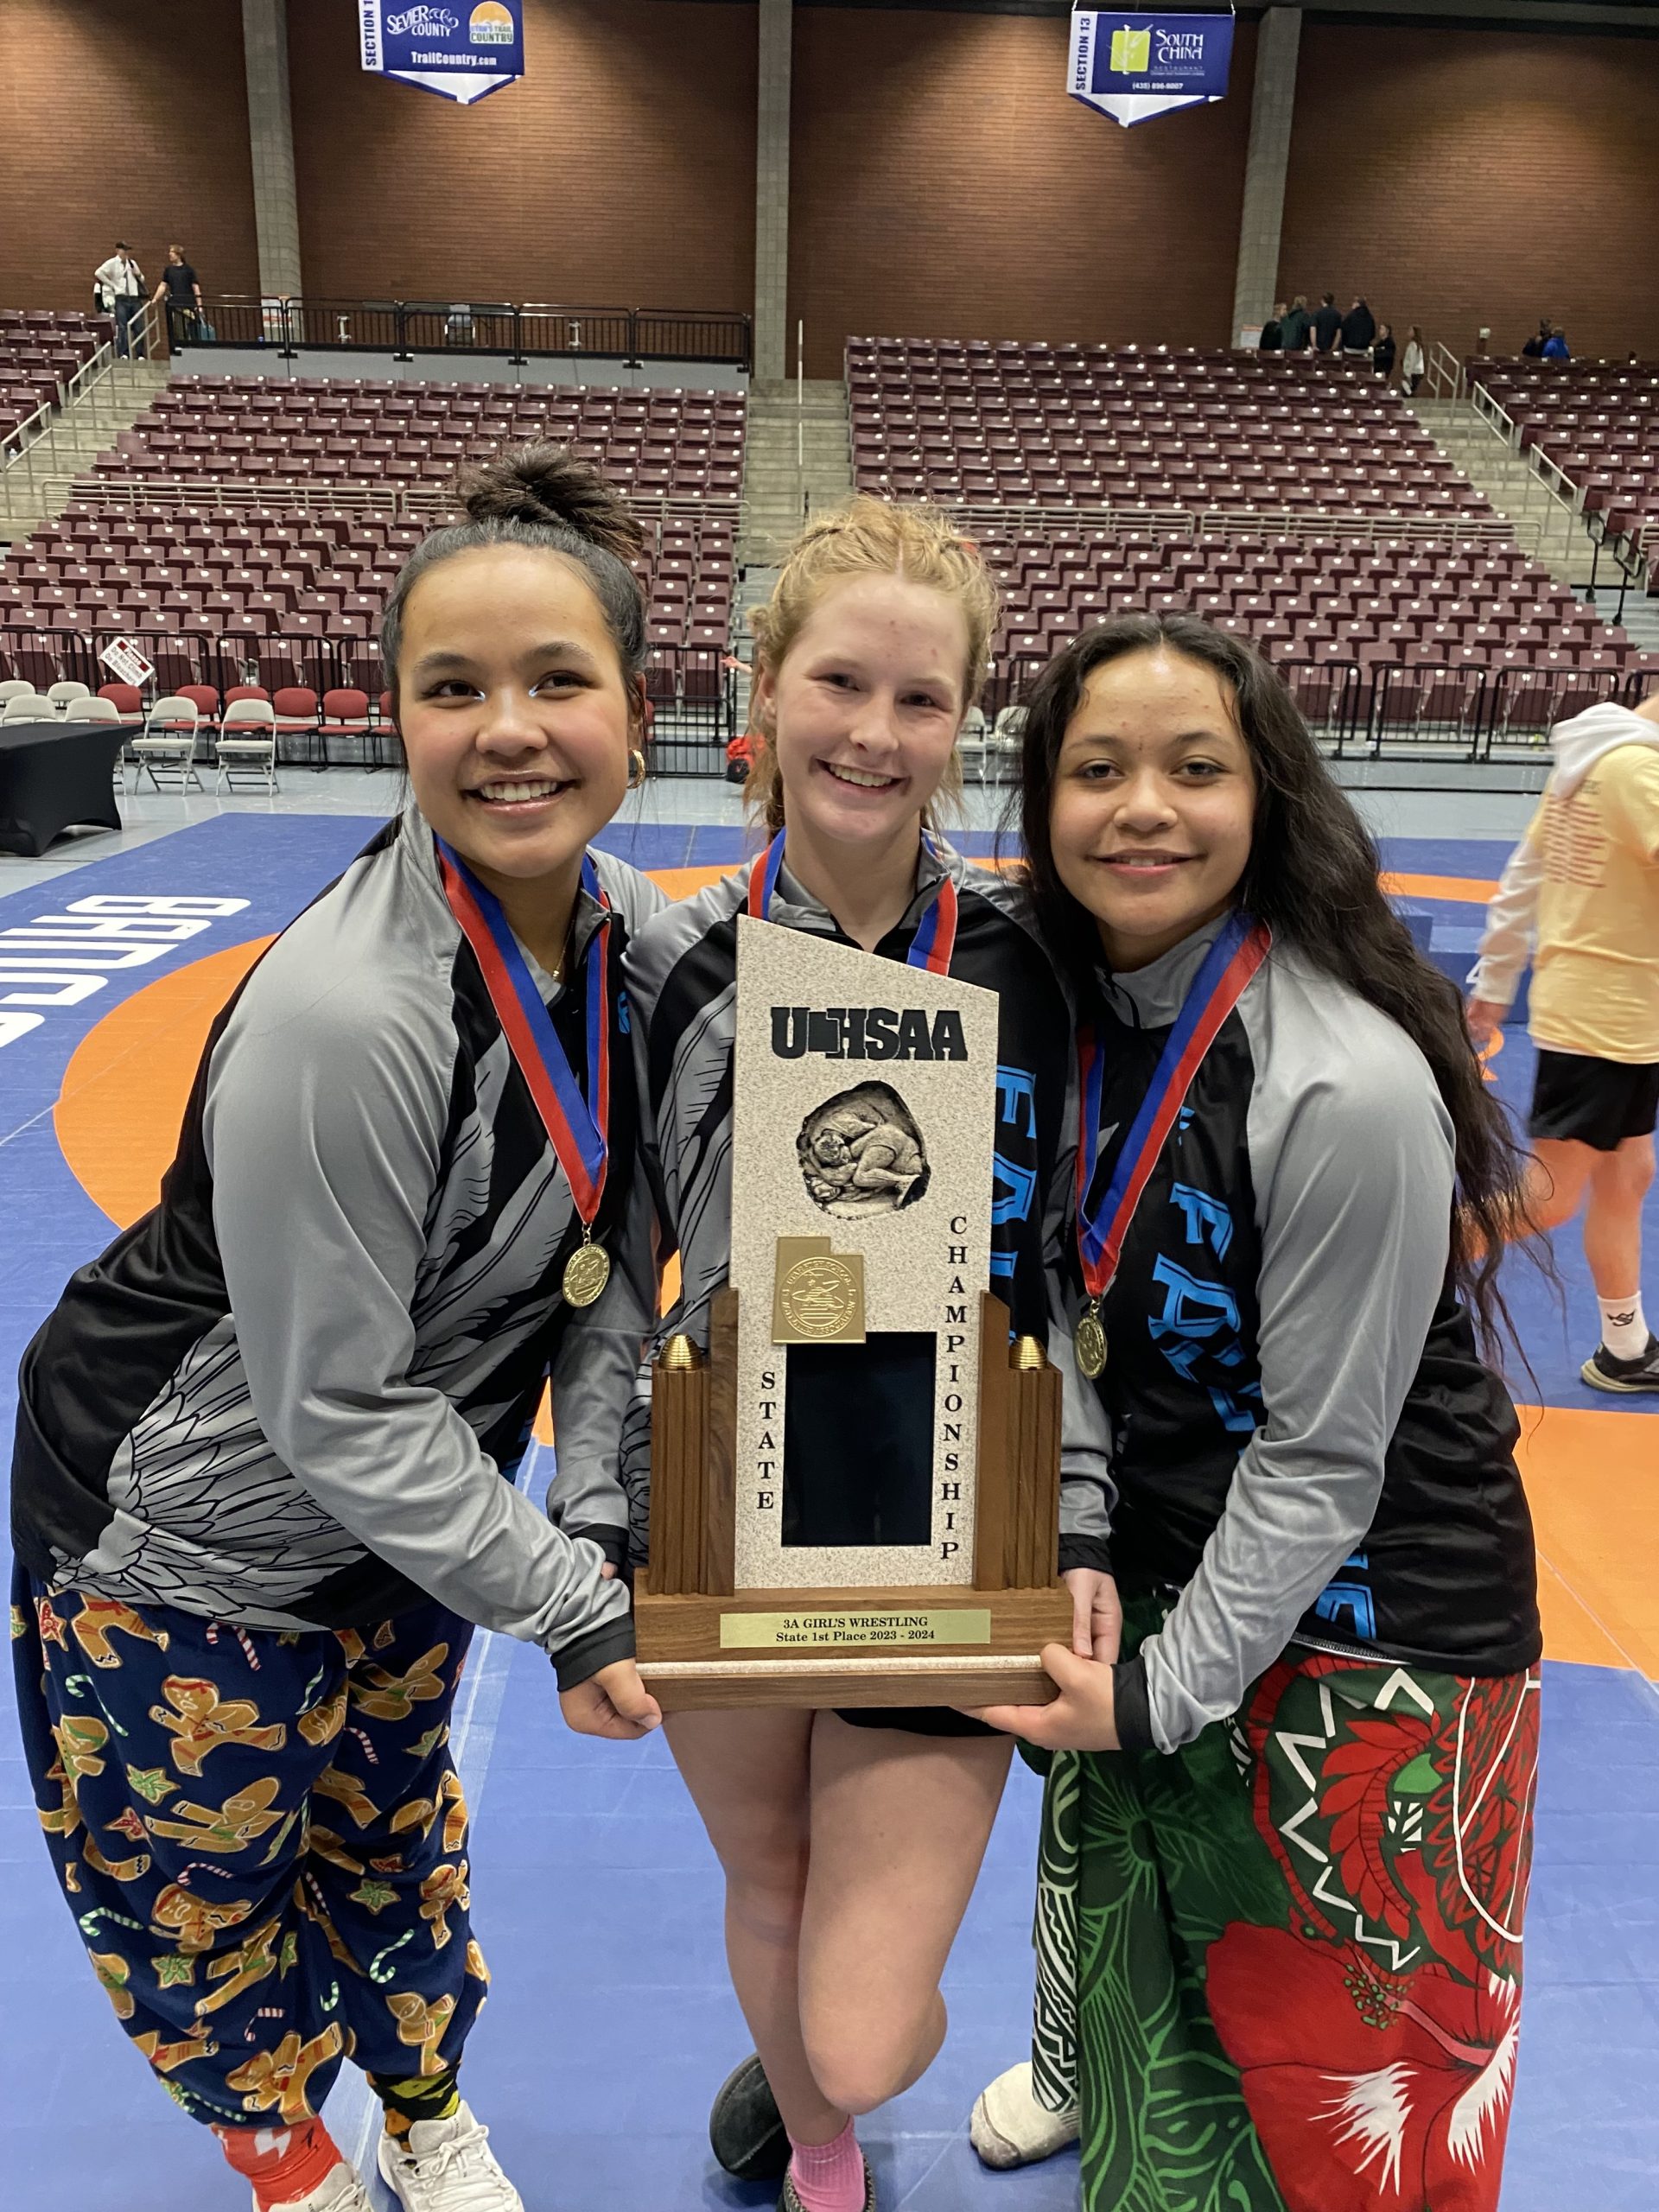 canyon-view-girls-grapple-their-way-to-school’s-1st-ever-state-wrestling-title